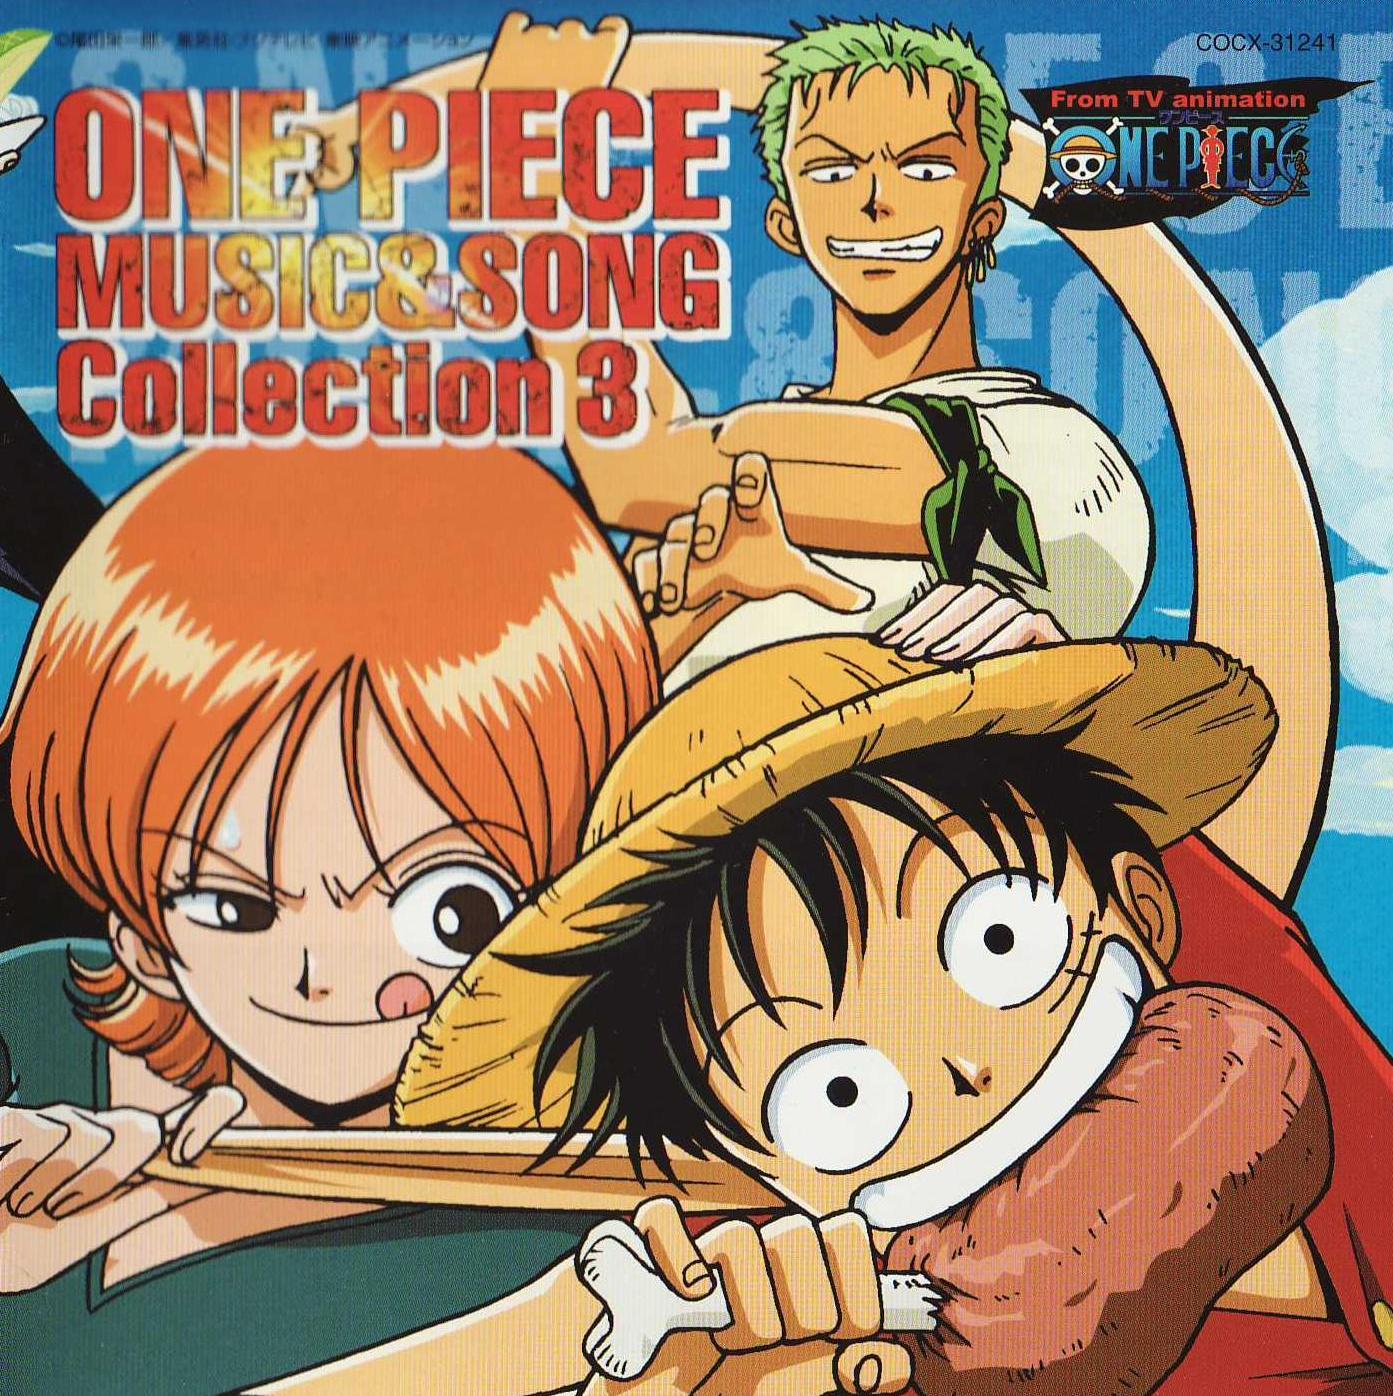 One Piece Music & Song Collection 3